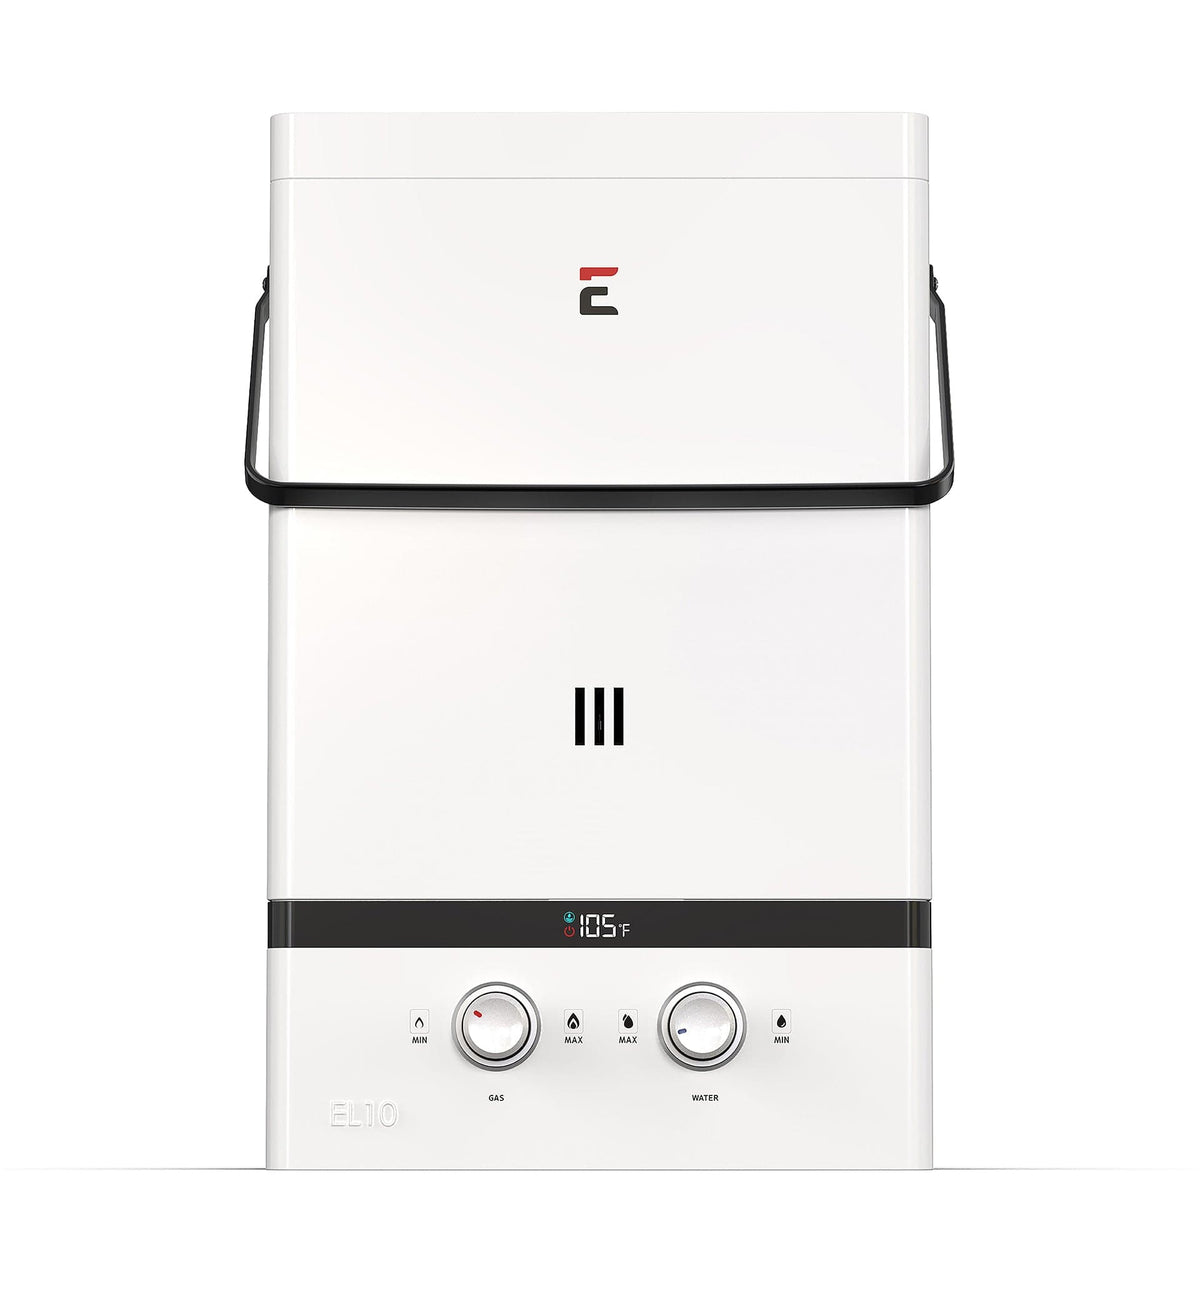 Eccotemp Heaters Eccotemp Luxé 3.0 GPM Portable Outdoor Tankless Water Heater w/ EccoFlo Diaphragm 12V Pump and Strainer